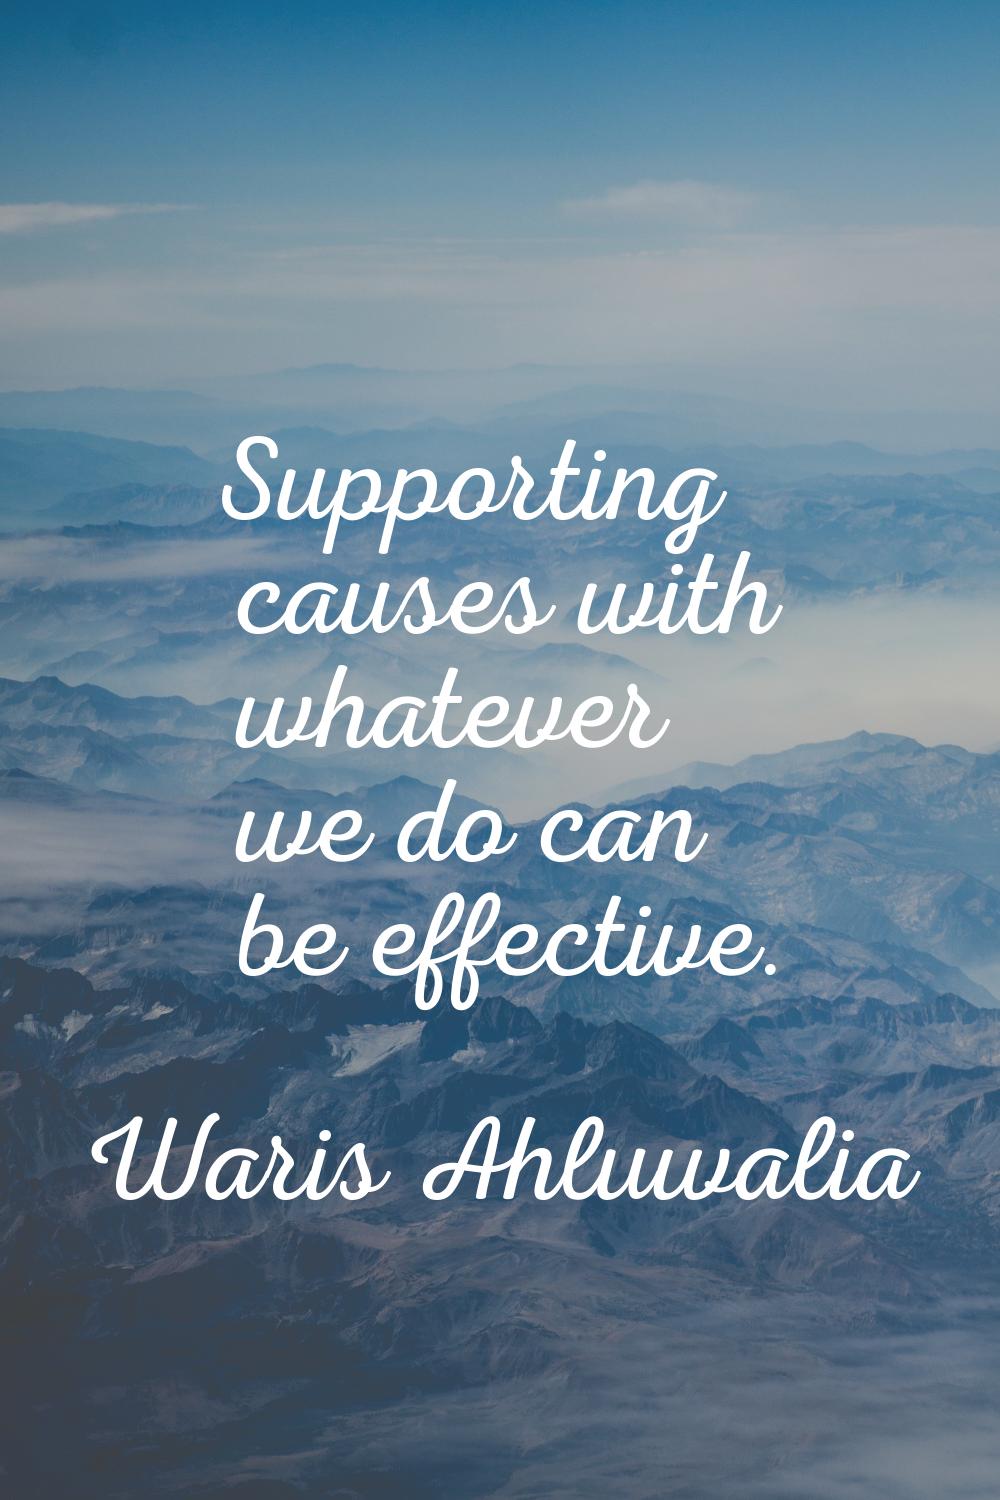 Supporting causes with whatever we do can be effective.